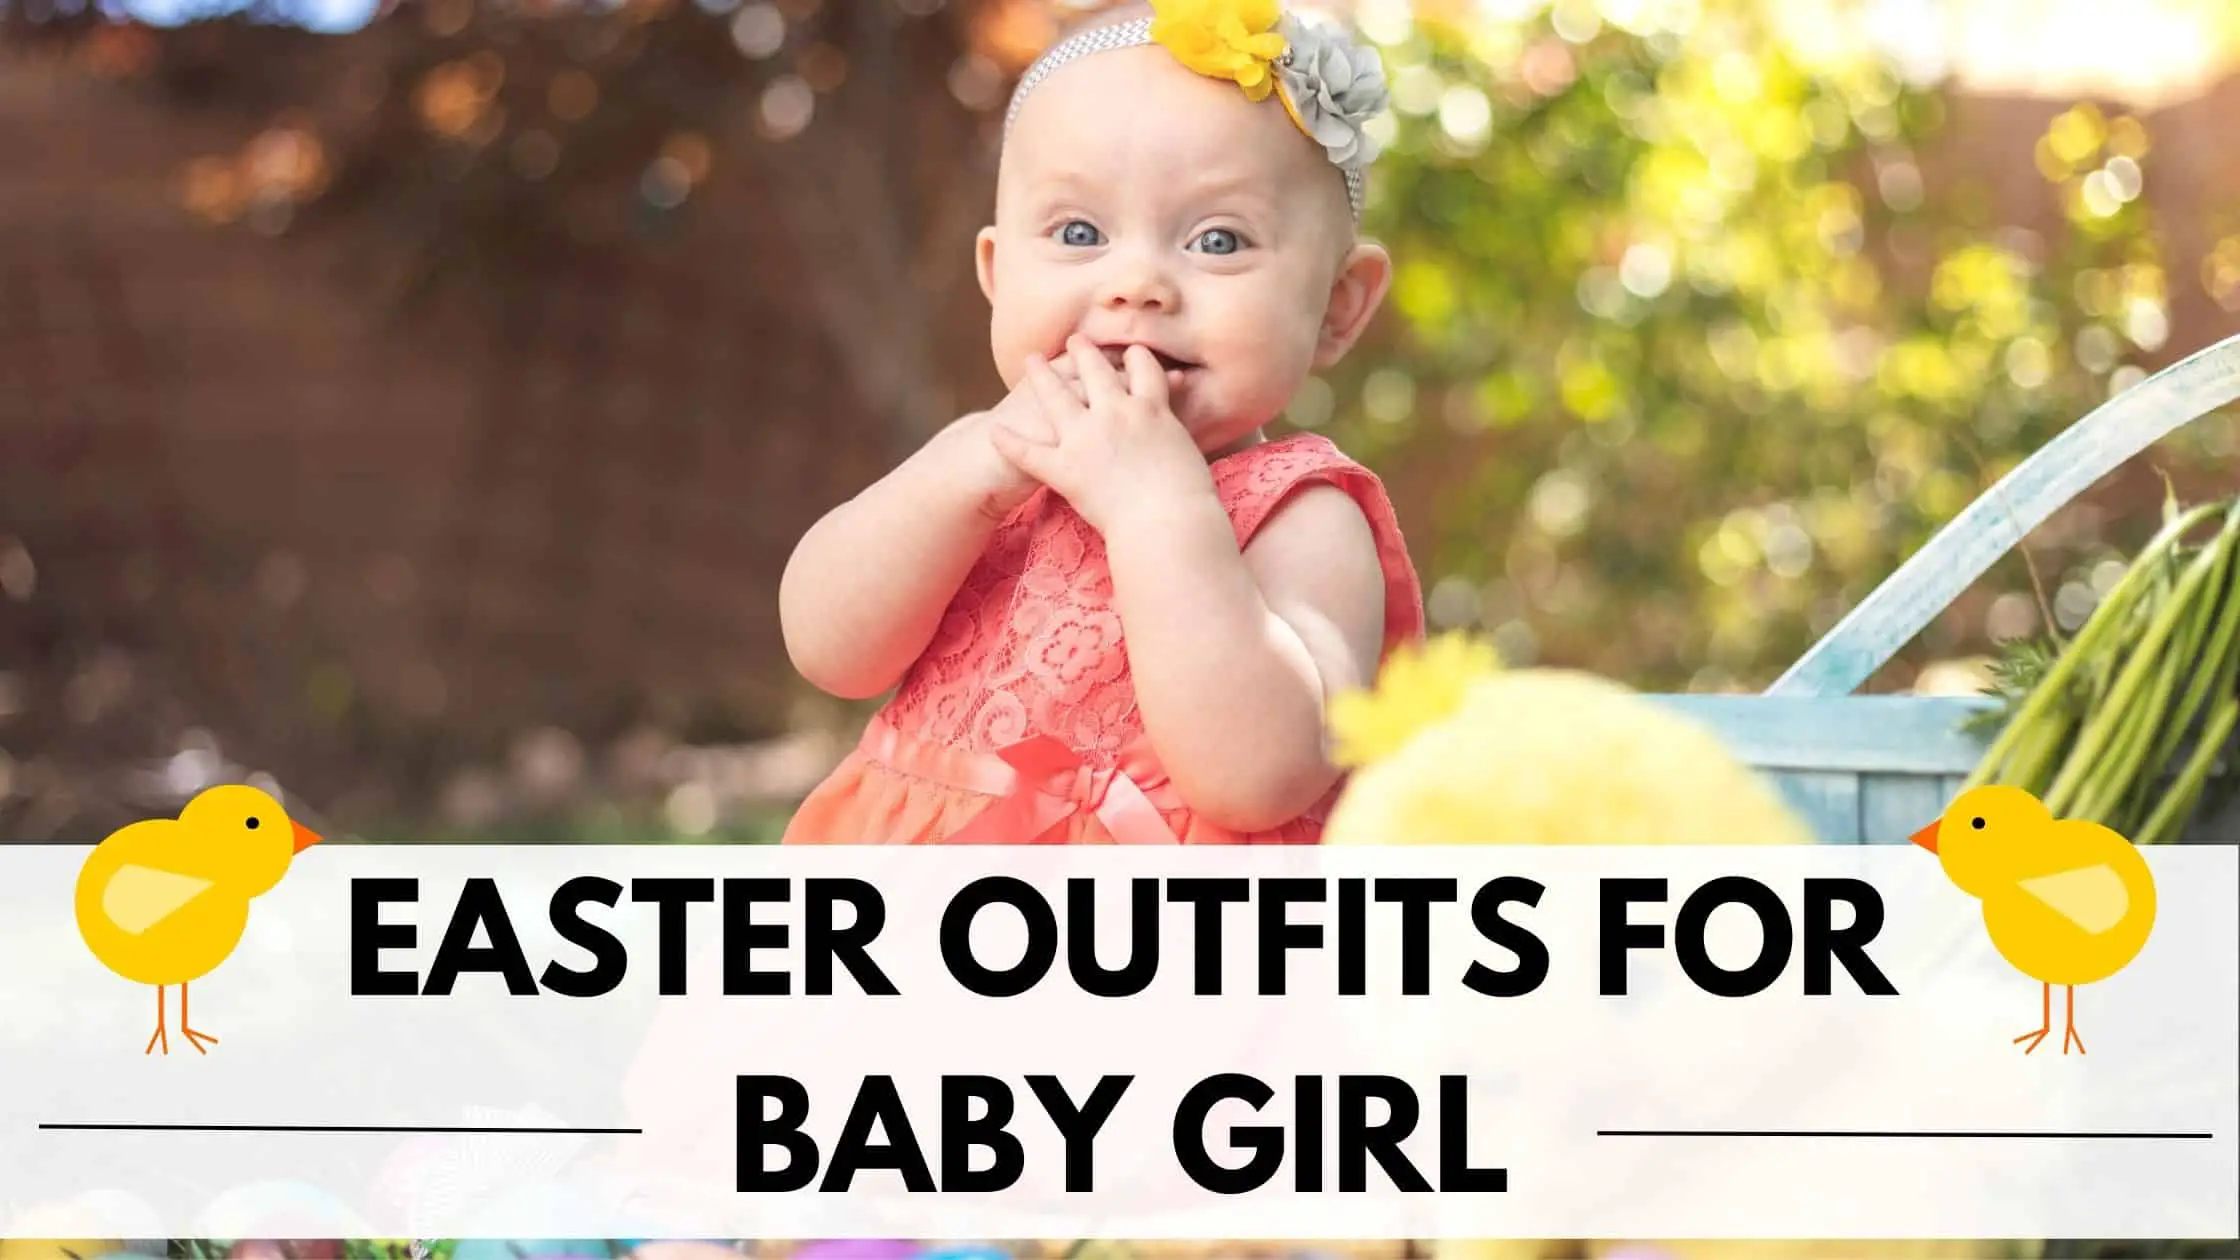 Easter outfits for baby girl